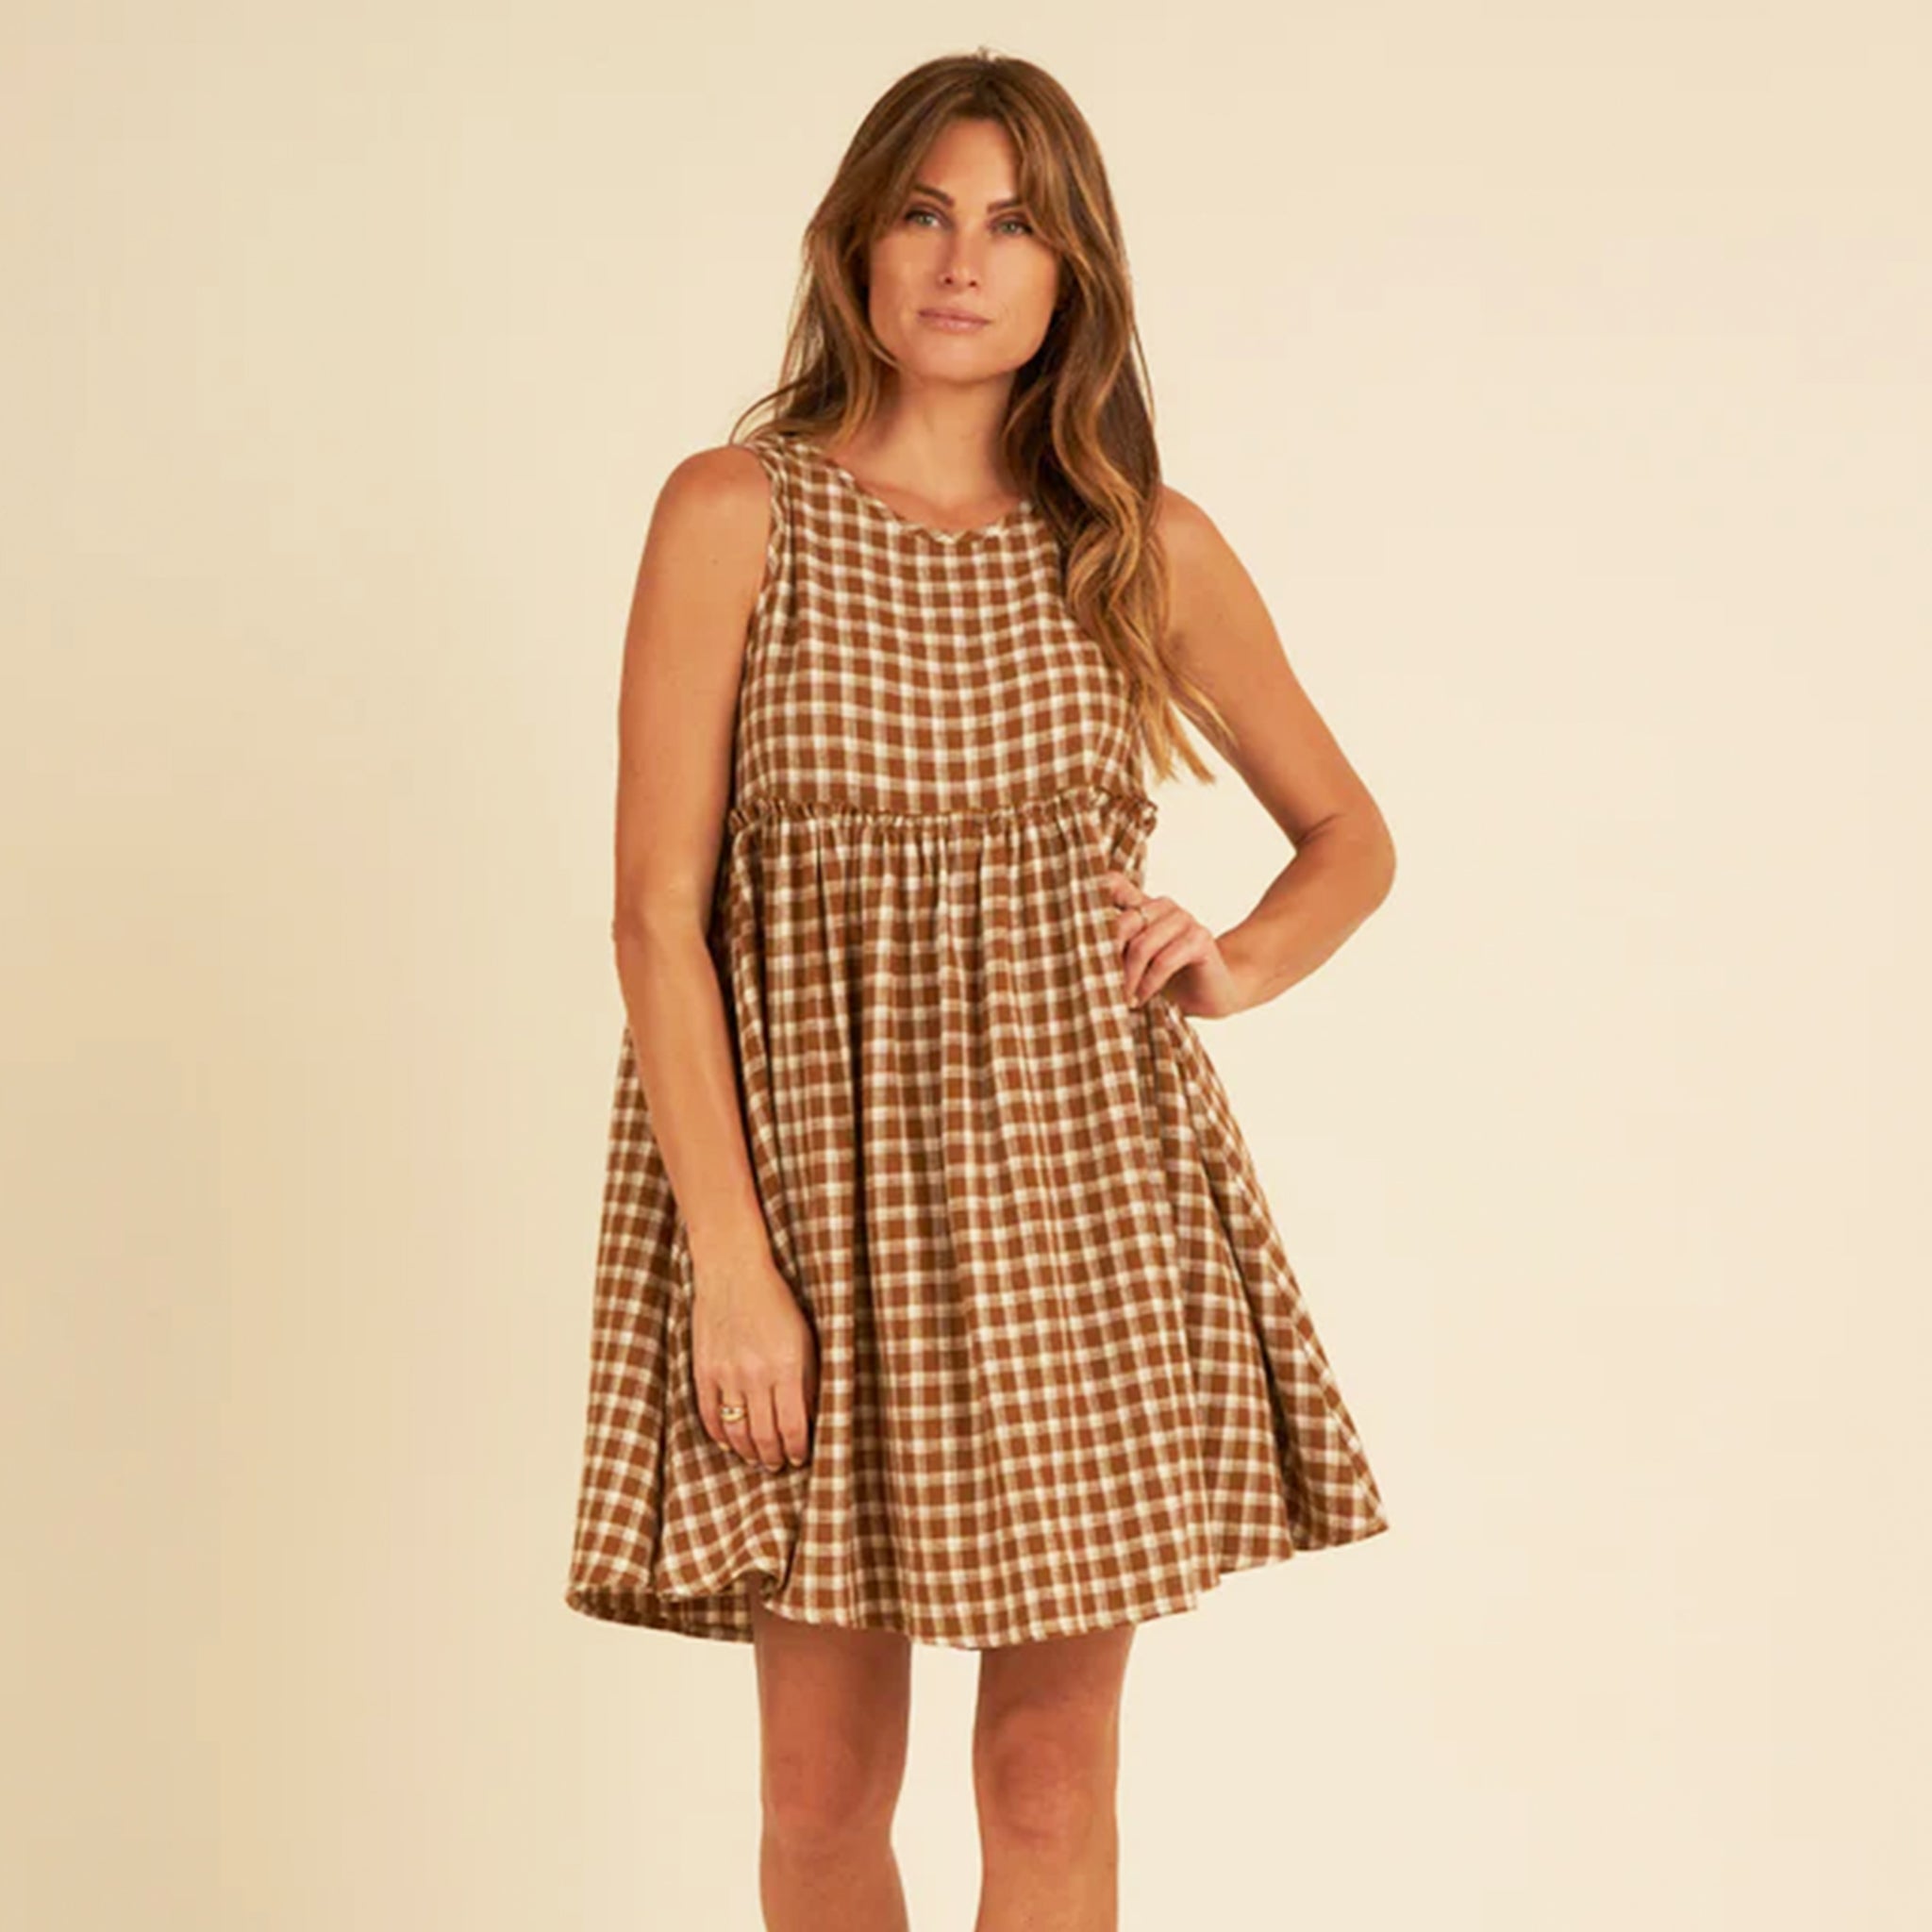 On a tan background is a model wearing a brown and tan plaid babydoll dress with a tie detail in the back.